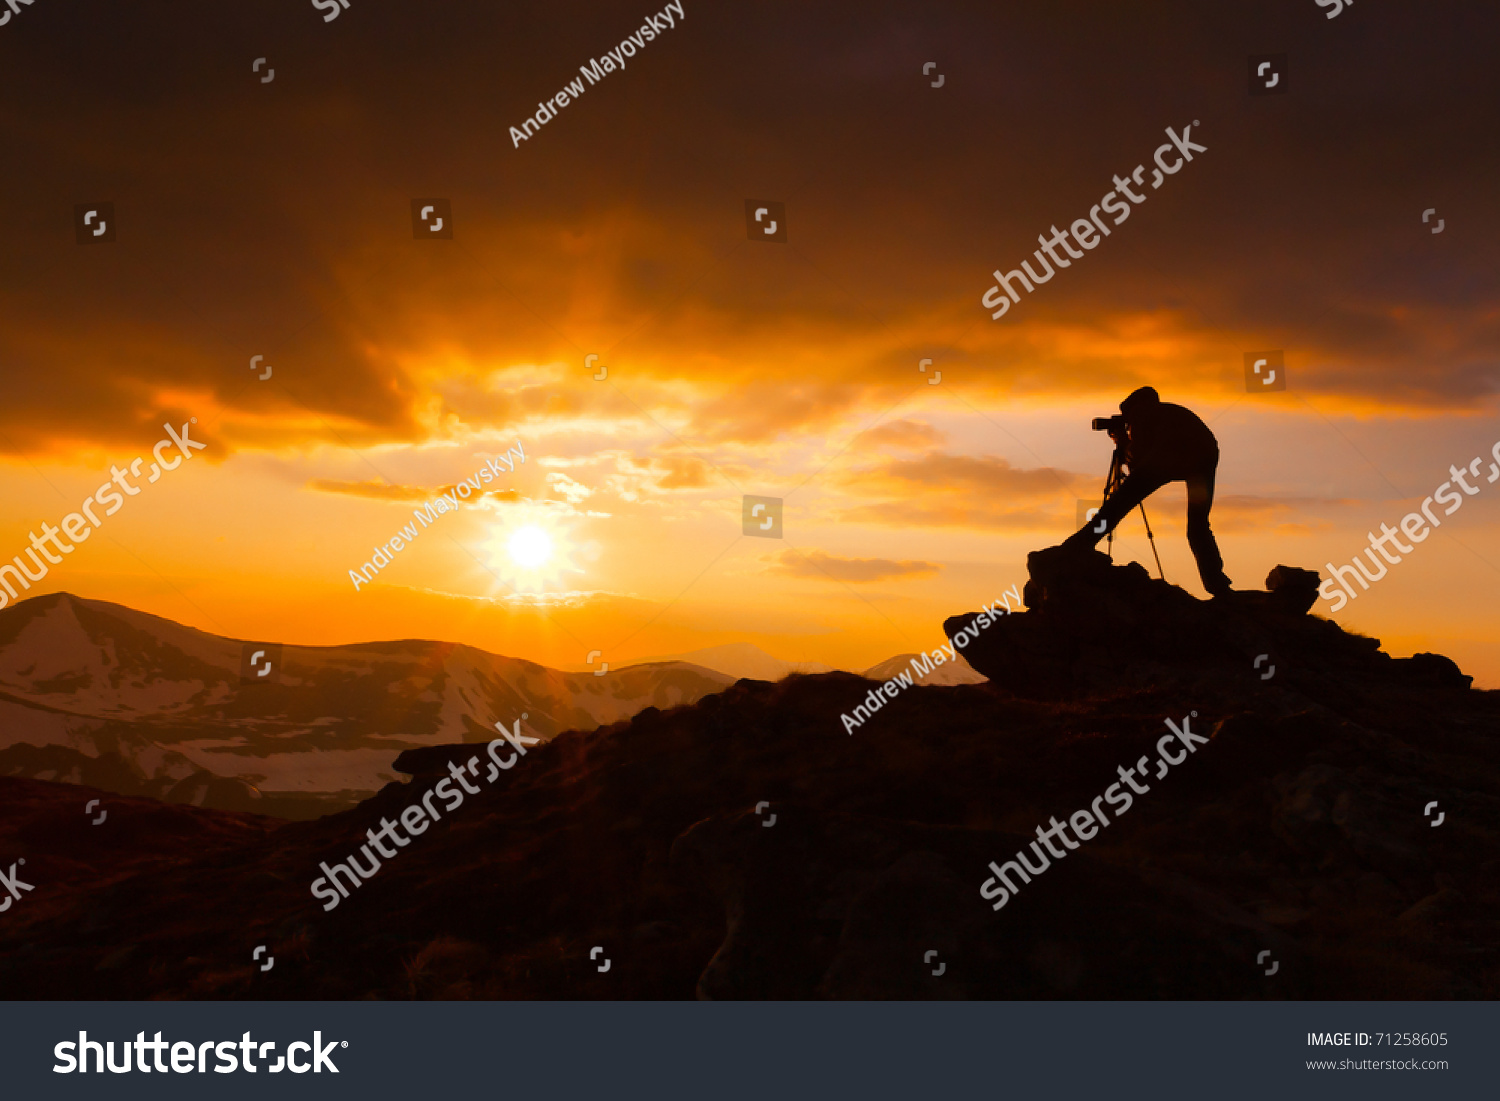 Silhouette Photographer Who Shoots Sunset Mountains Stock Photo ...